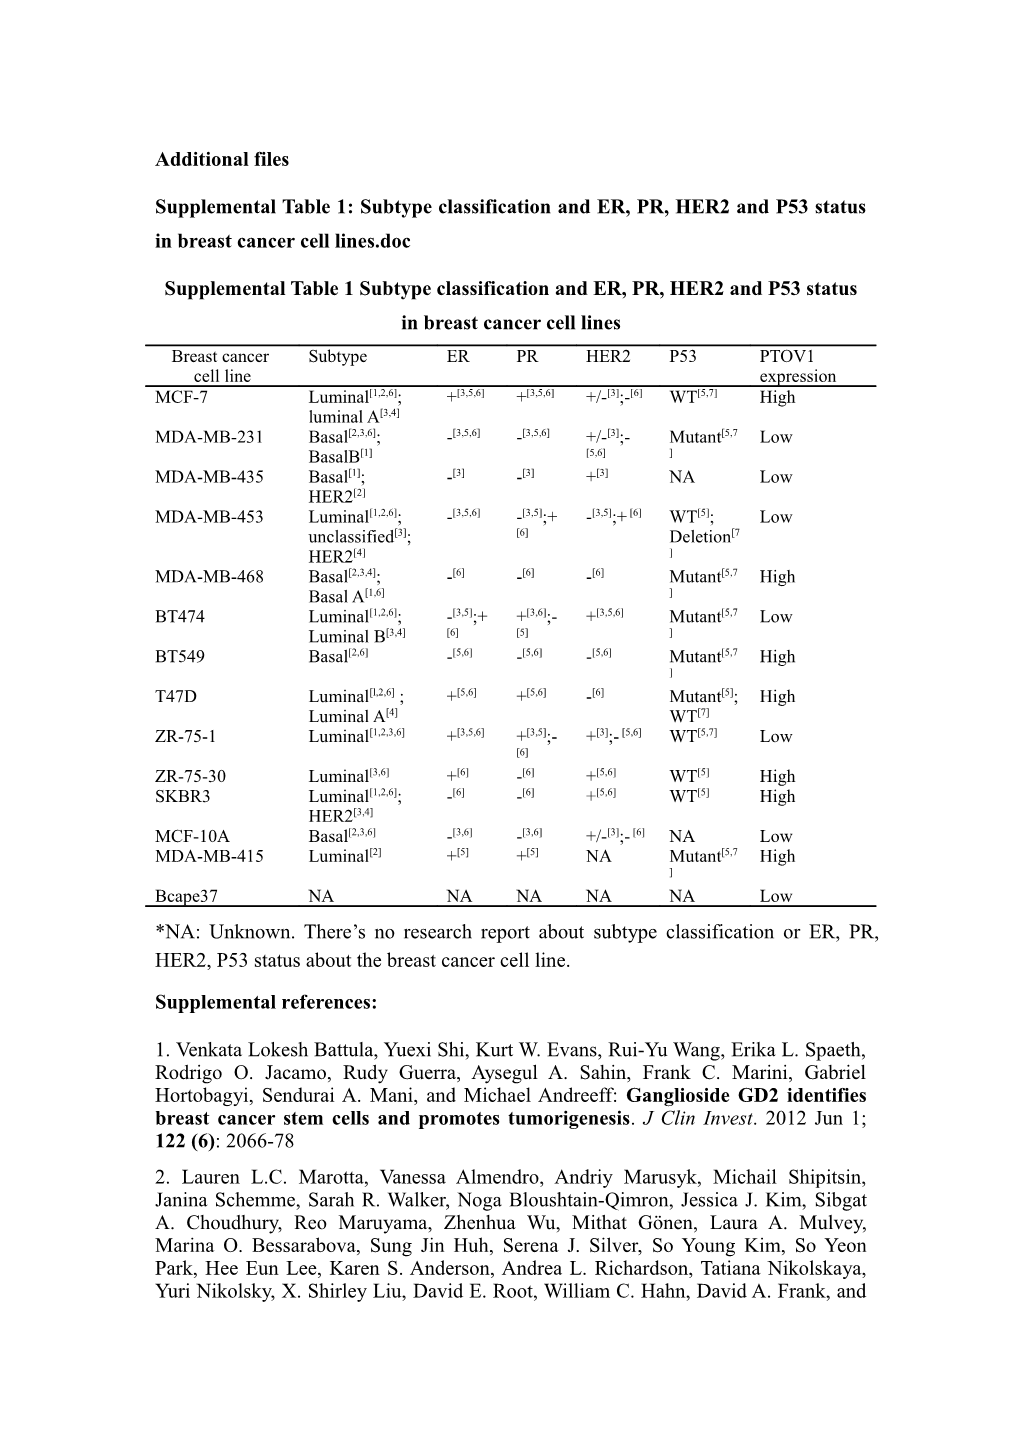 Supplemental Table 1: Subtype Classification and ER, PR, HER2 and P53 Status in Breast